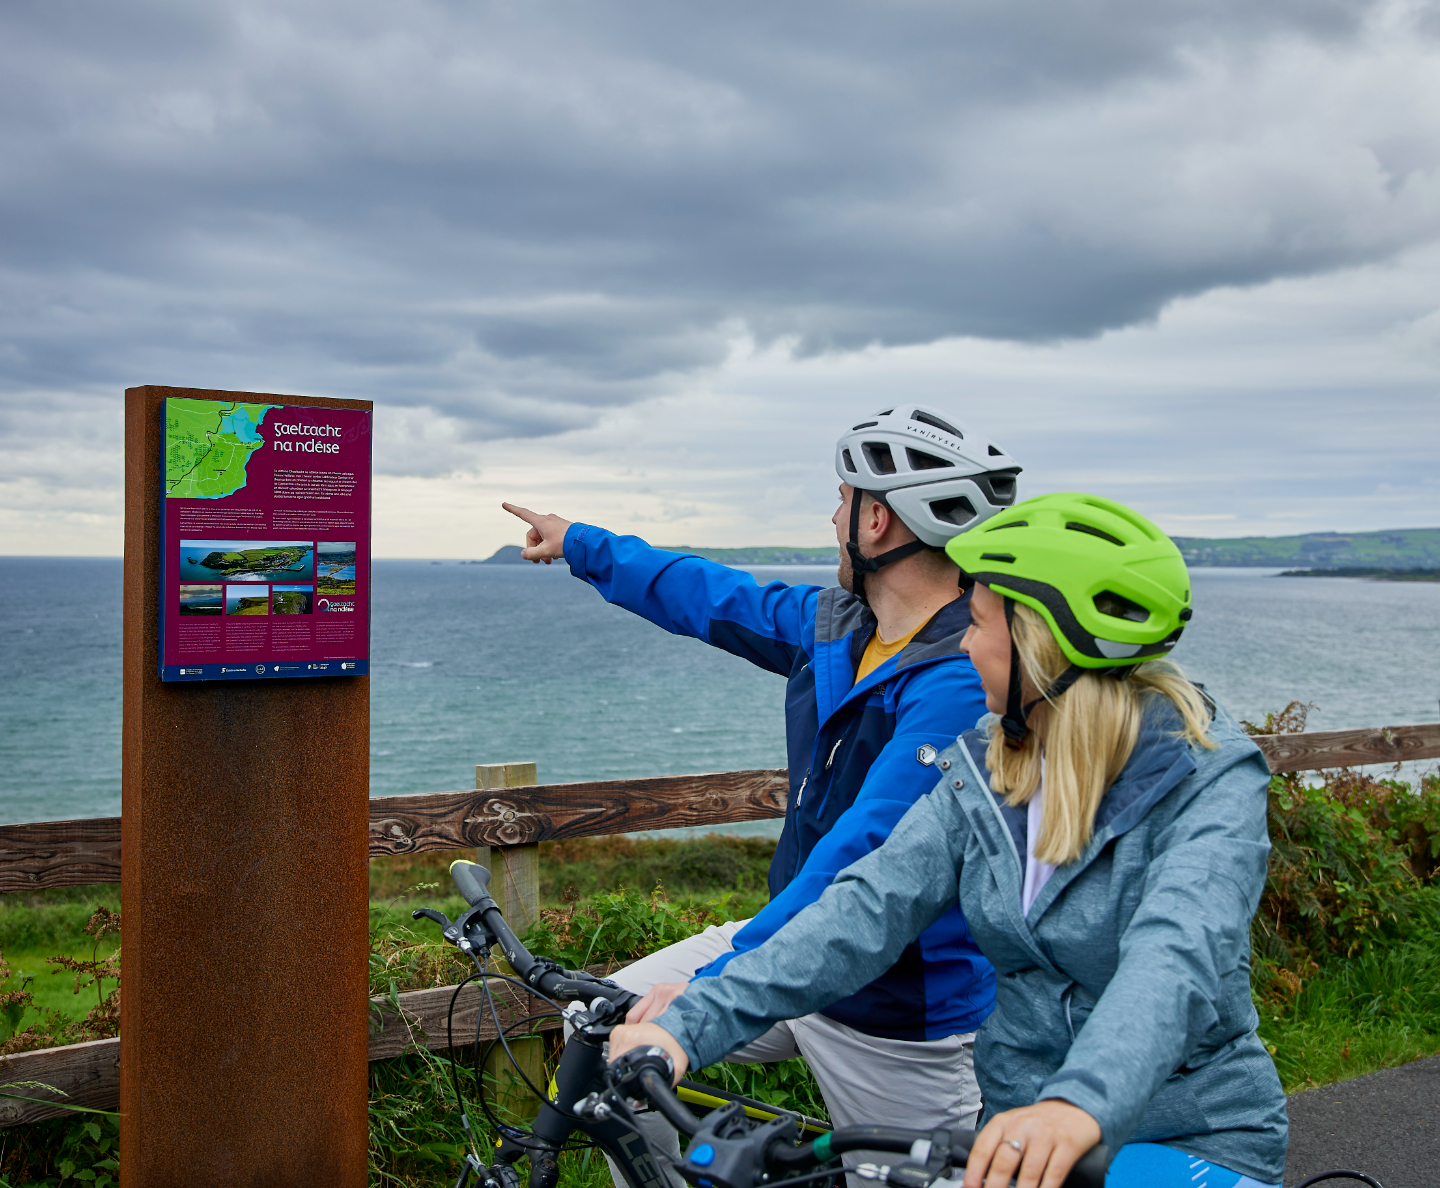 Two cyclists pointing towards a map